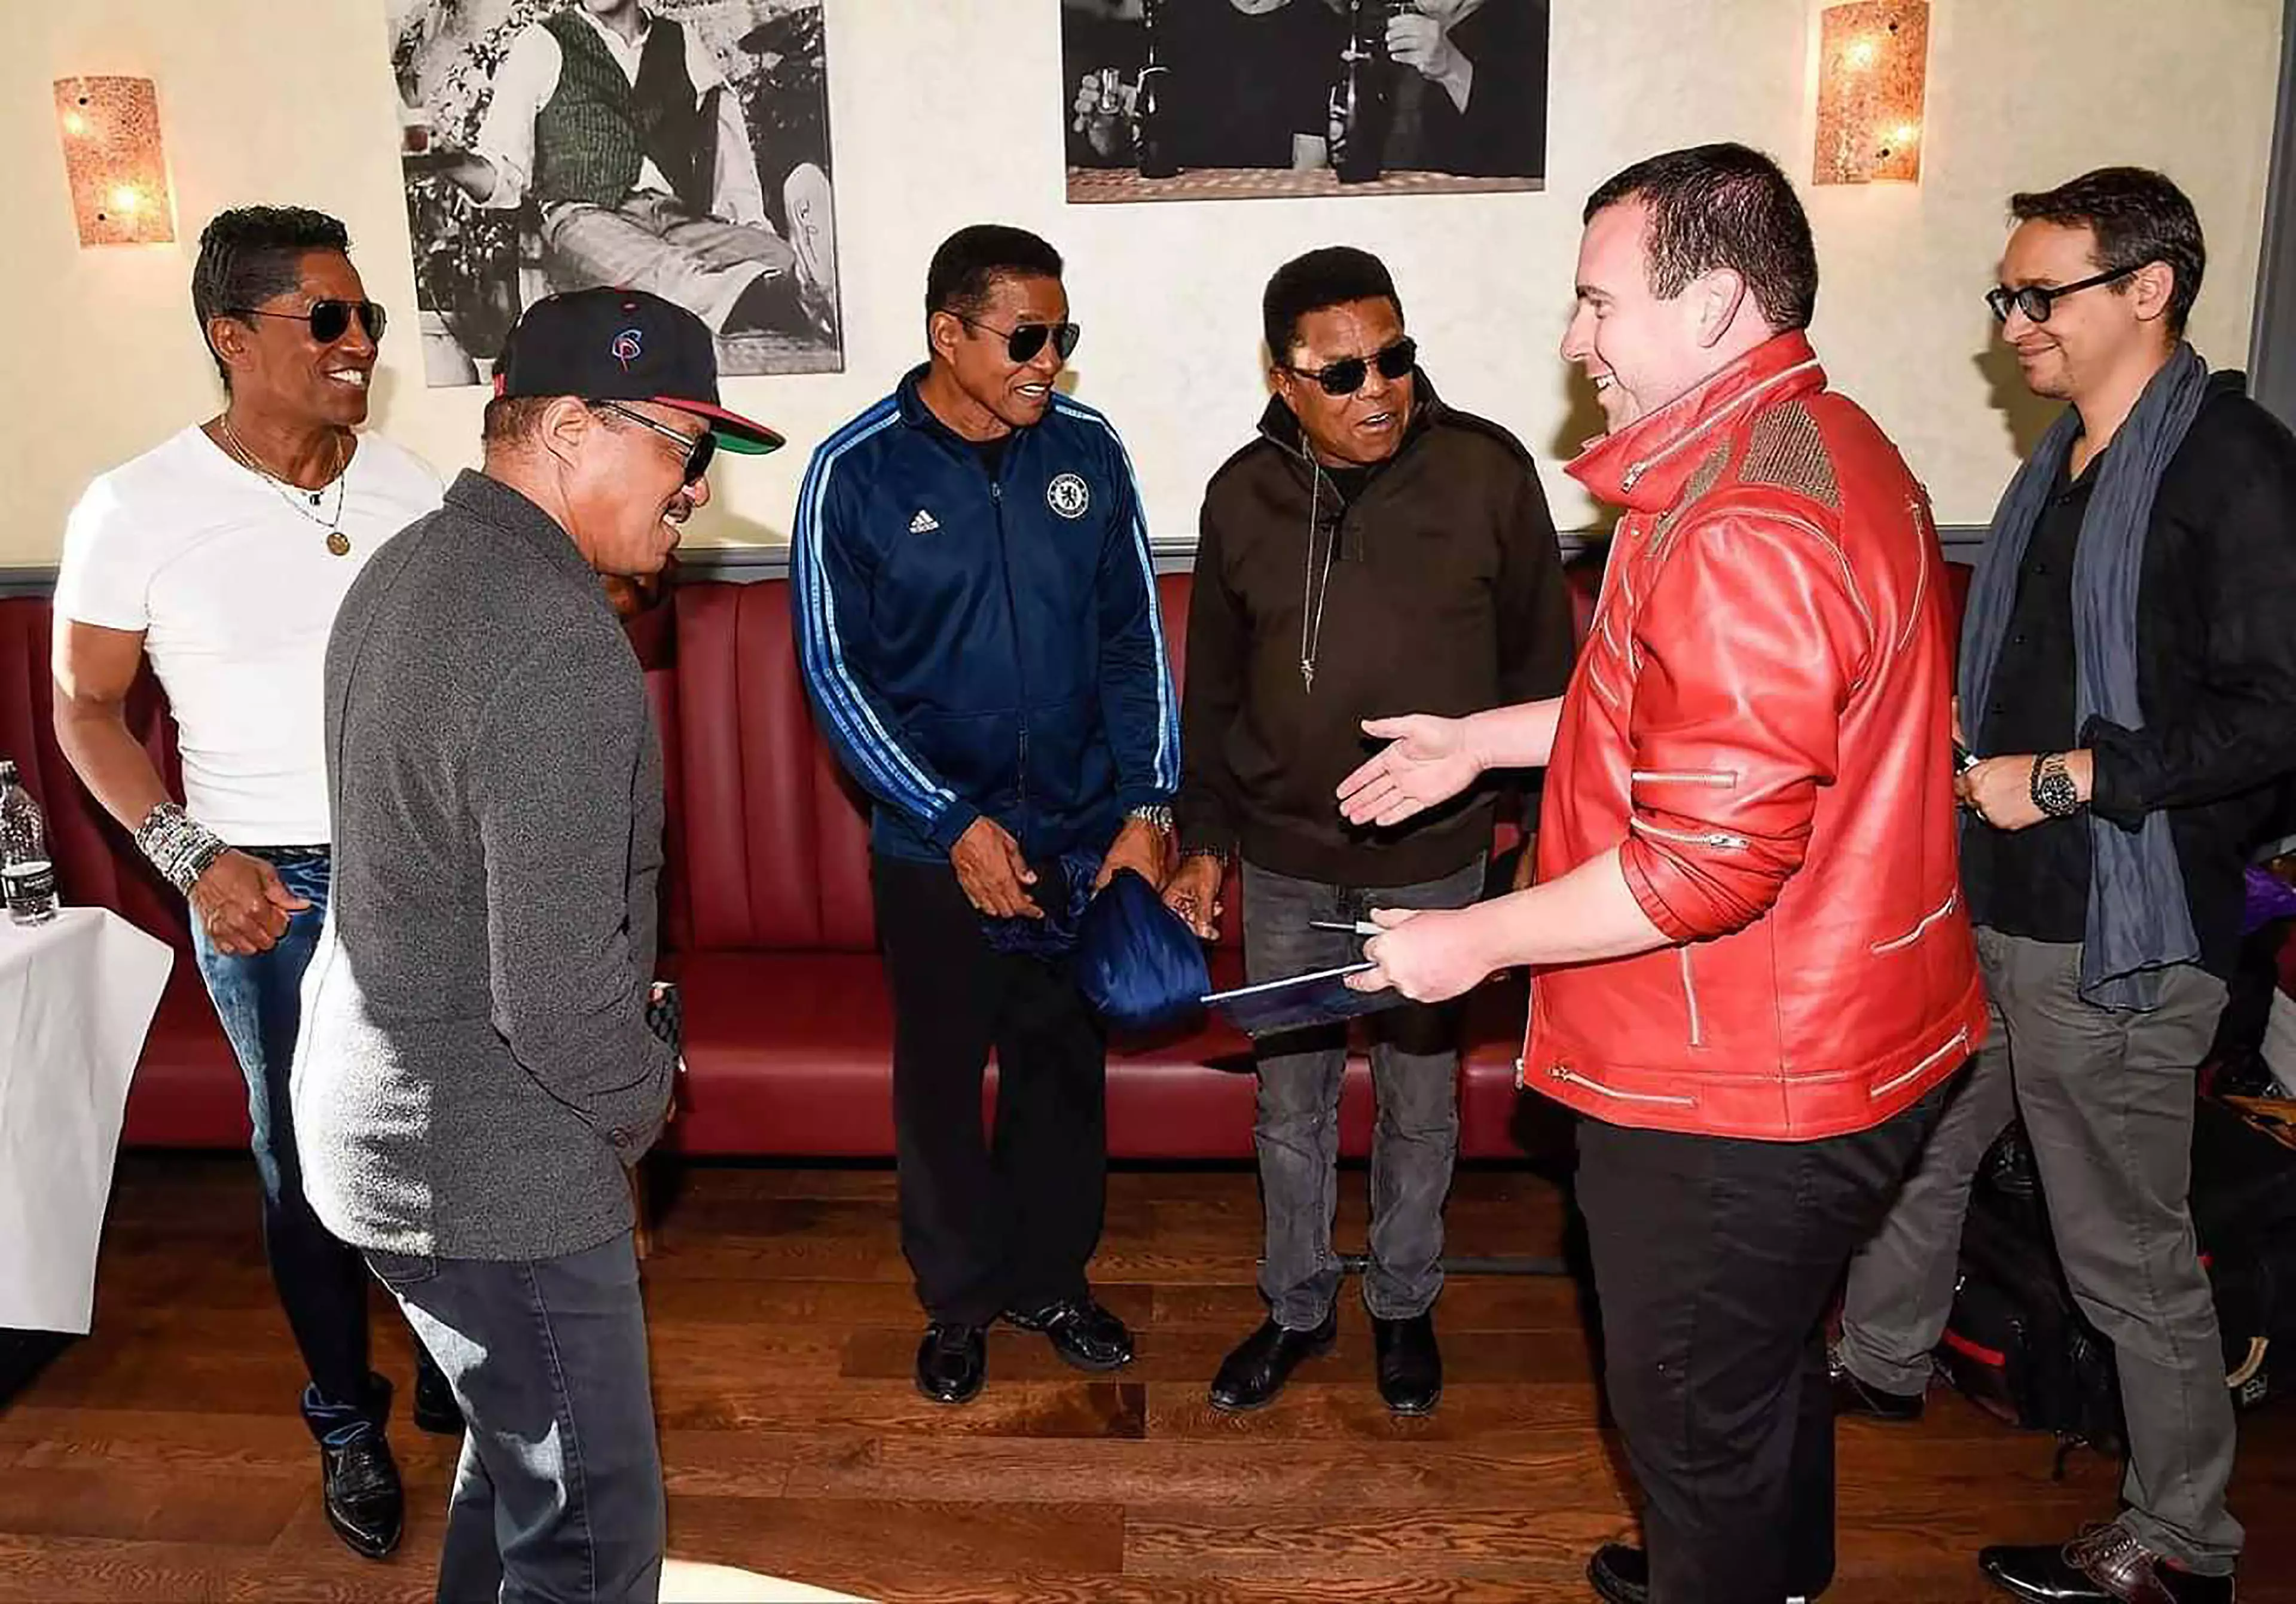 John with the Jackson Brothers.